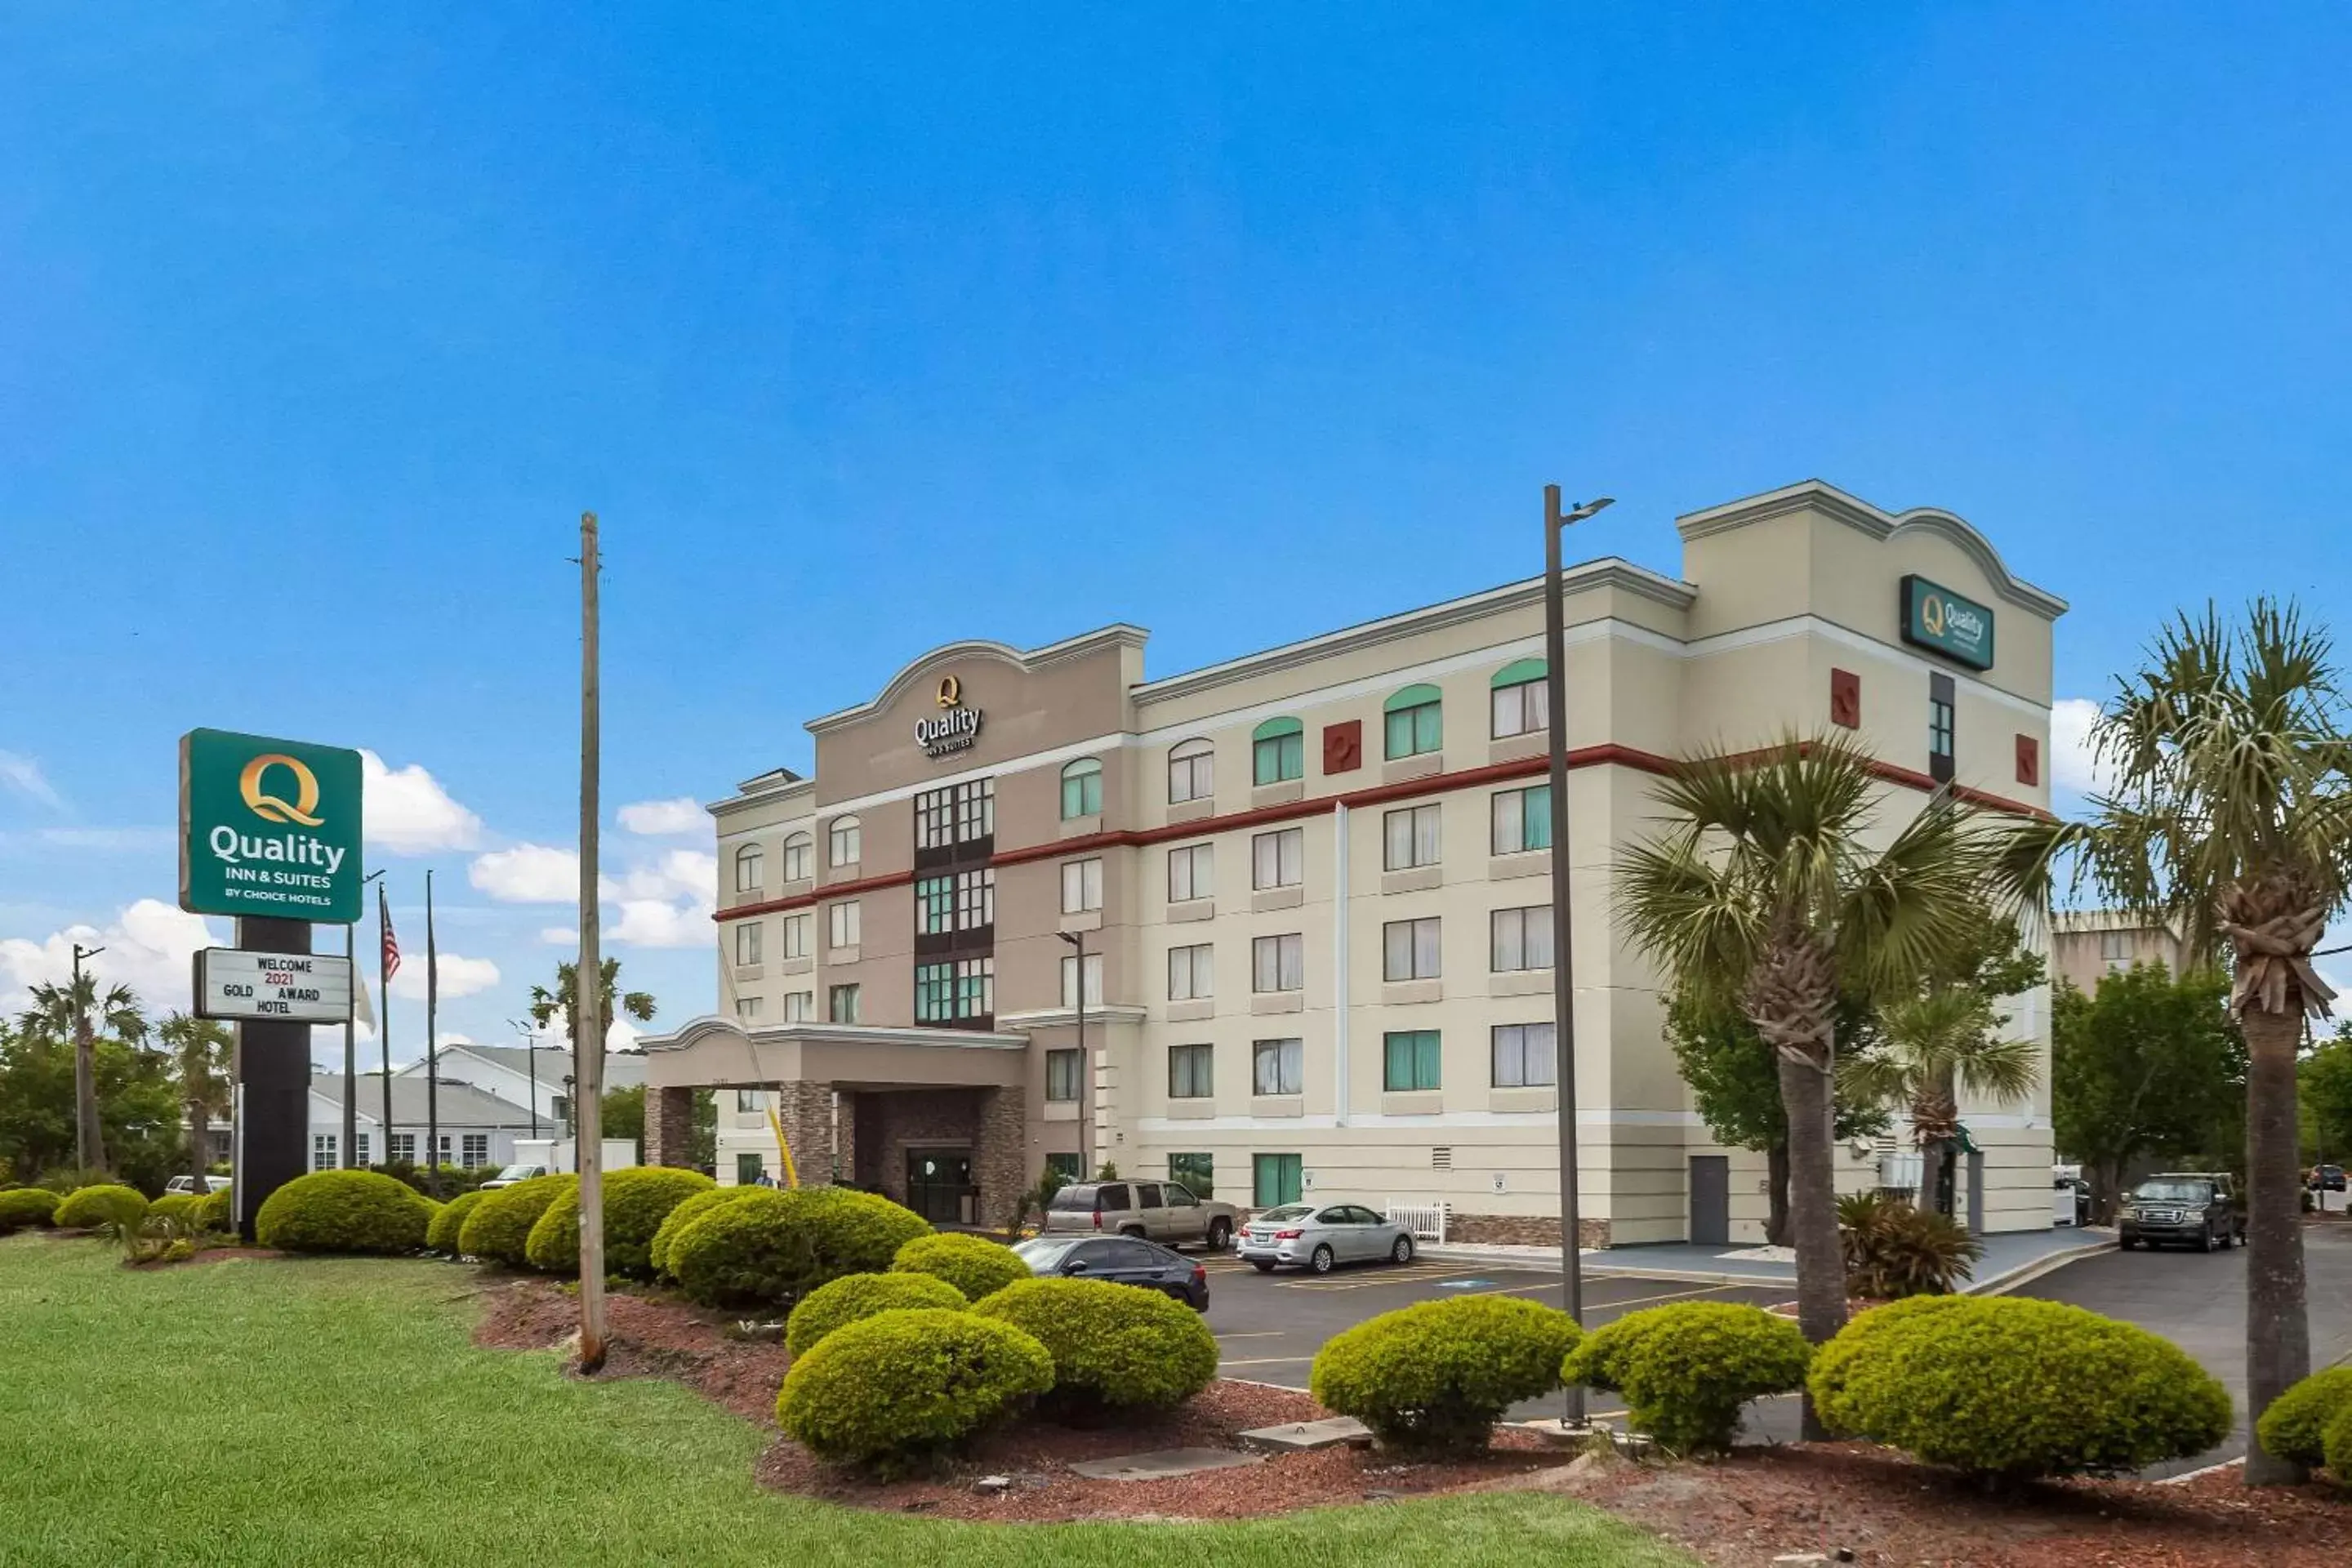 Property Building in Quality Inn & Suites North Myrtle Beach